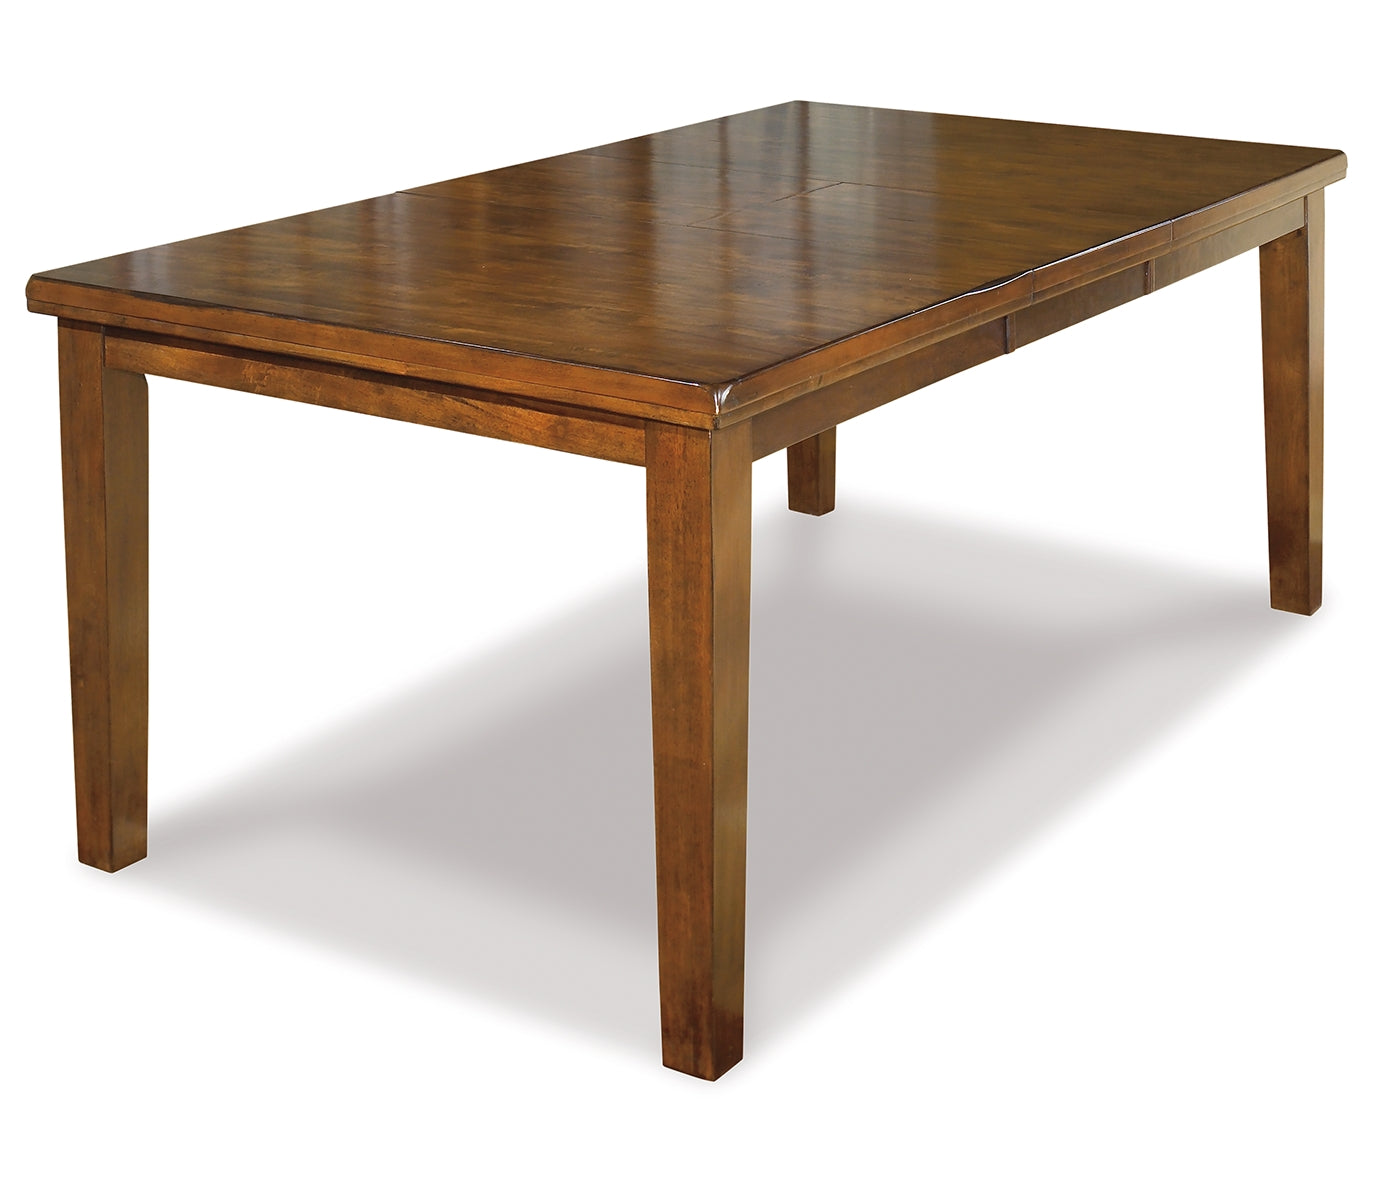 Ralene Dining Extension Table